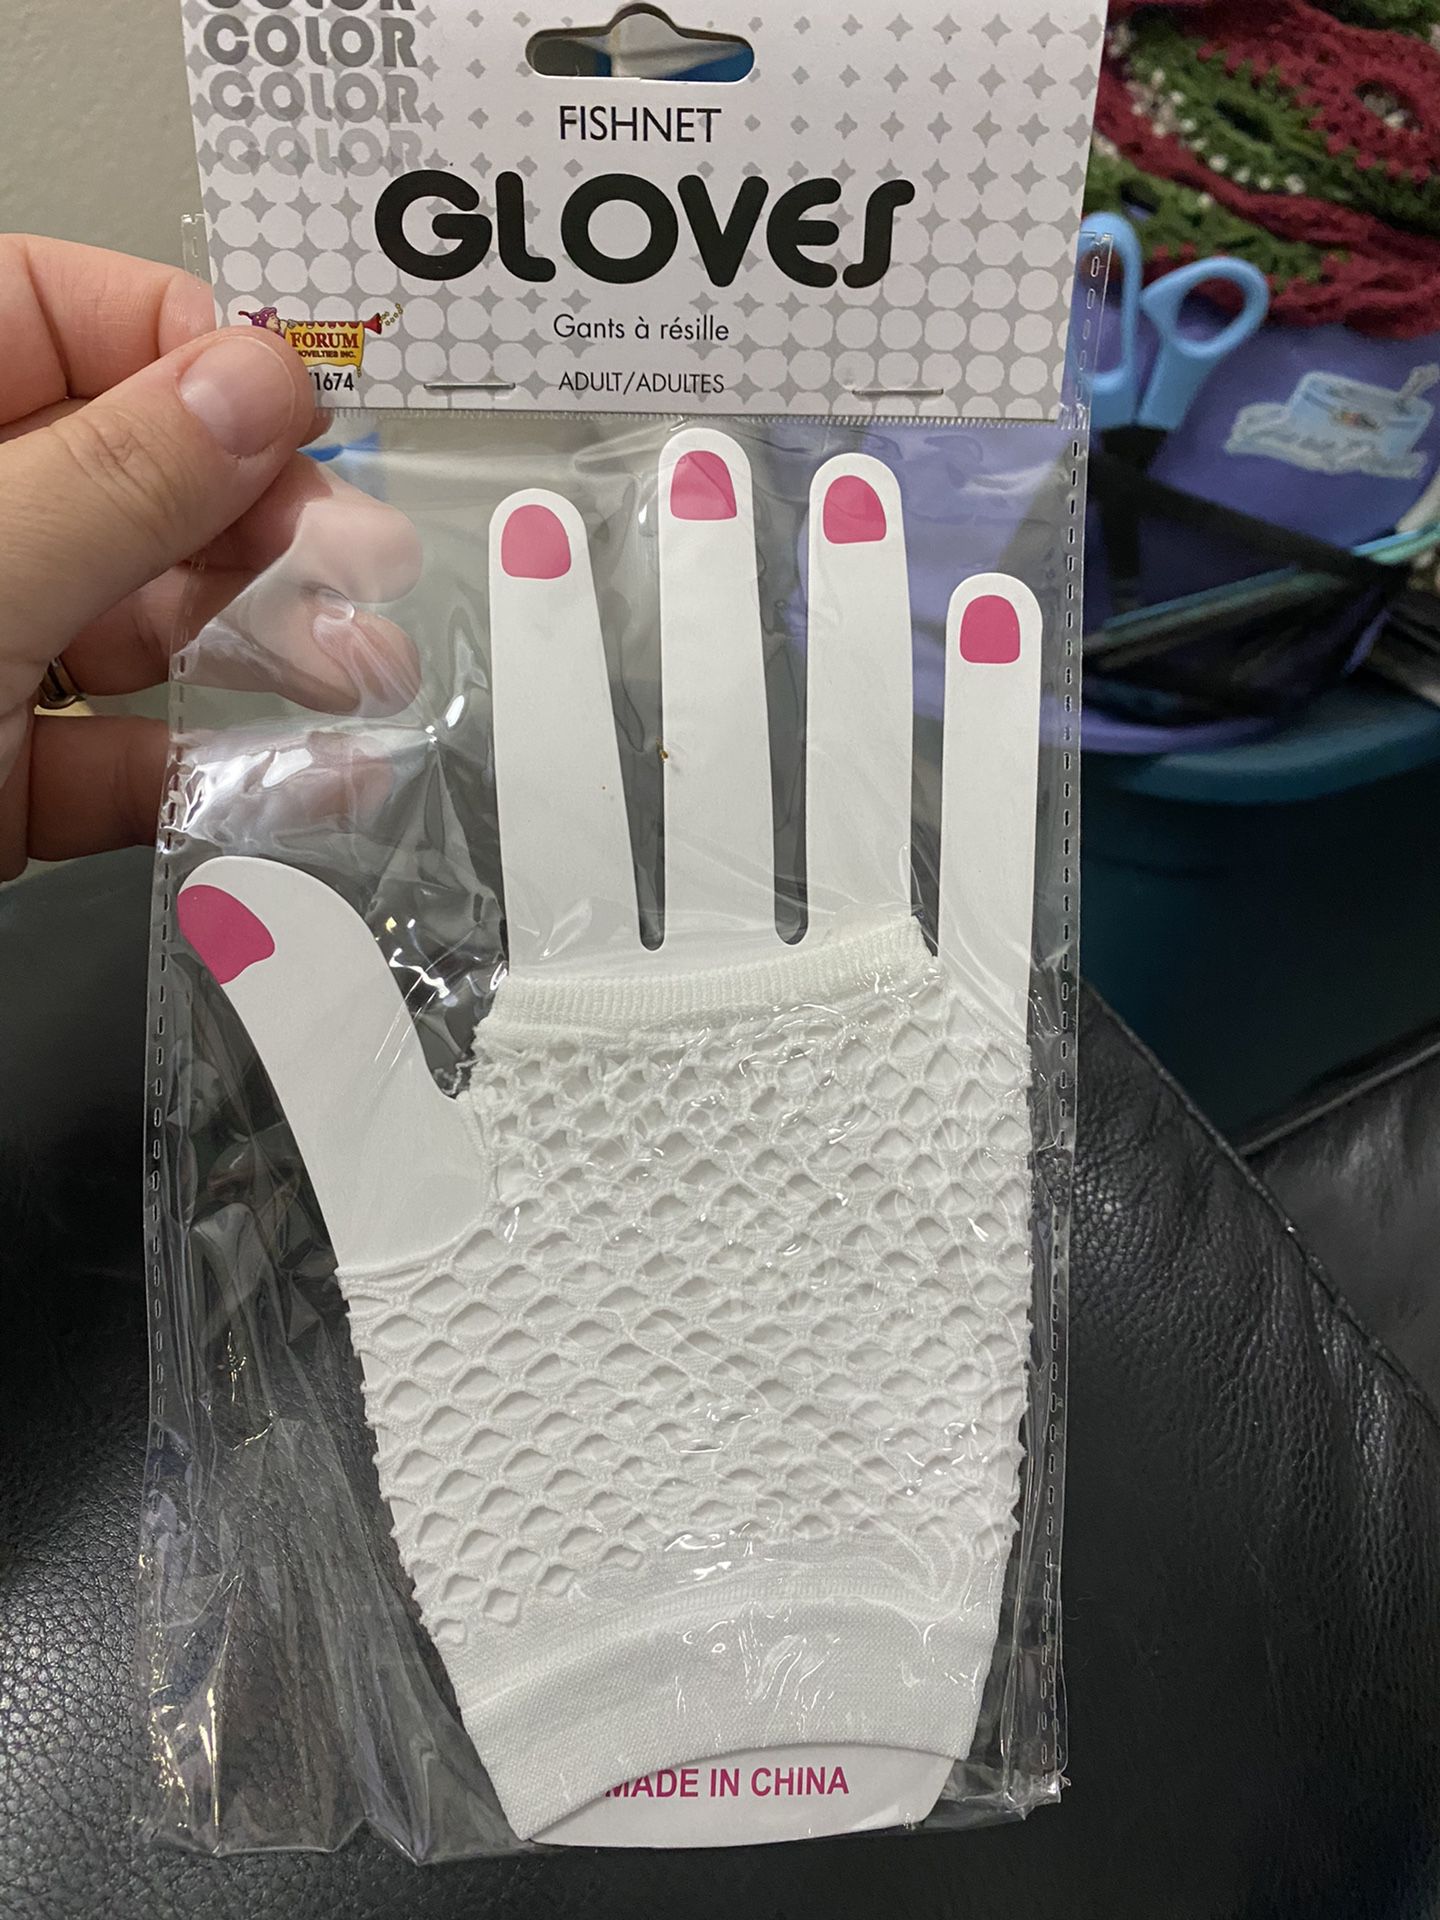 New White Fishnet Gloves Adult Costume Accessory!